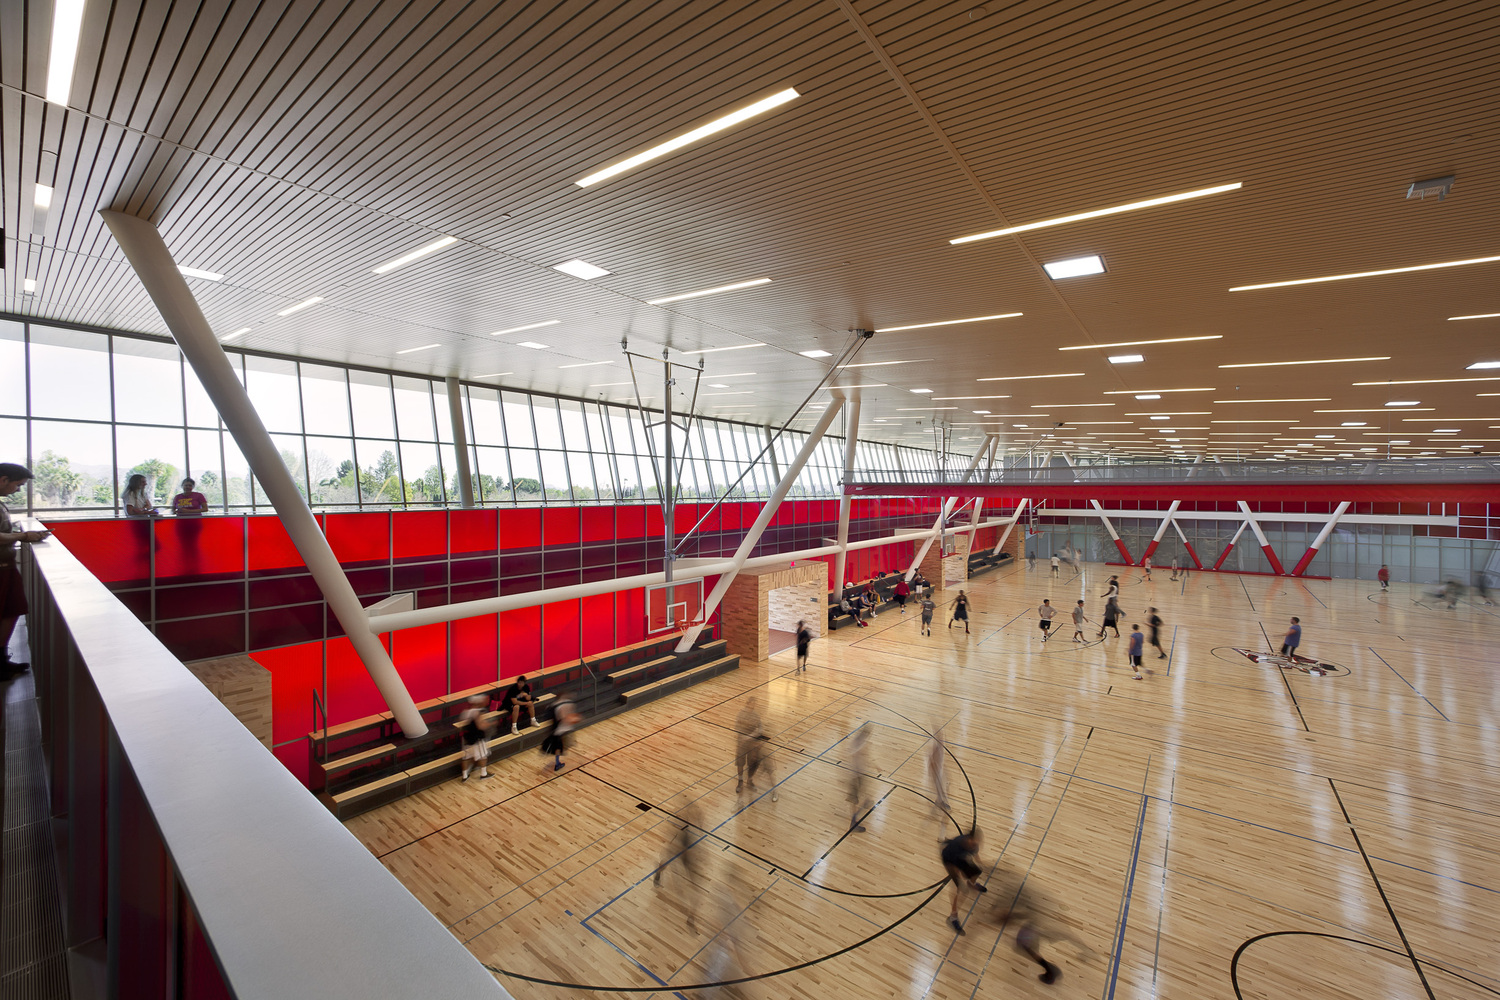 The three-court gymnasium receives constant use by CSUN students, along with the MAC gym, weight and fitness space, rock wall, and dance room.